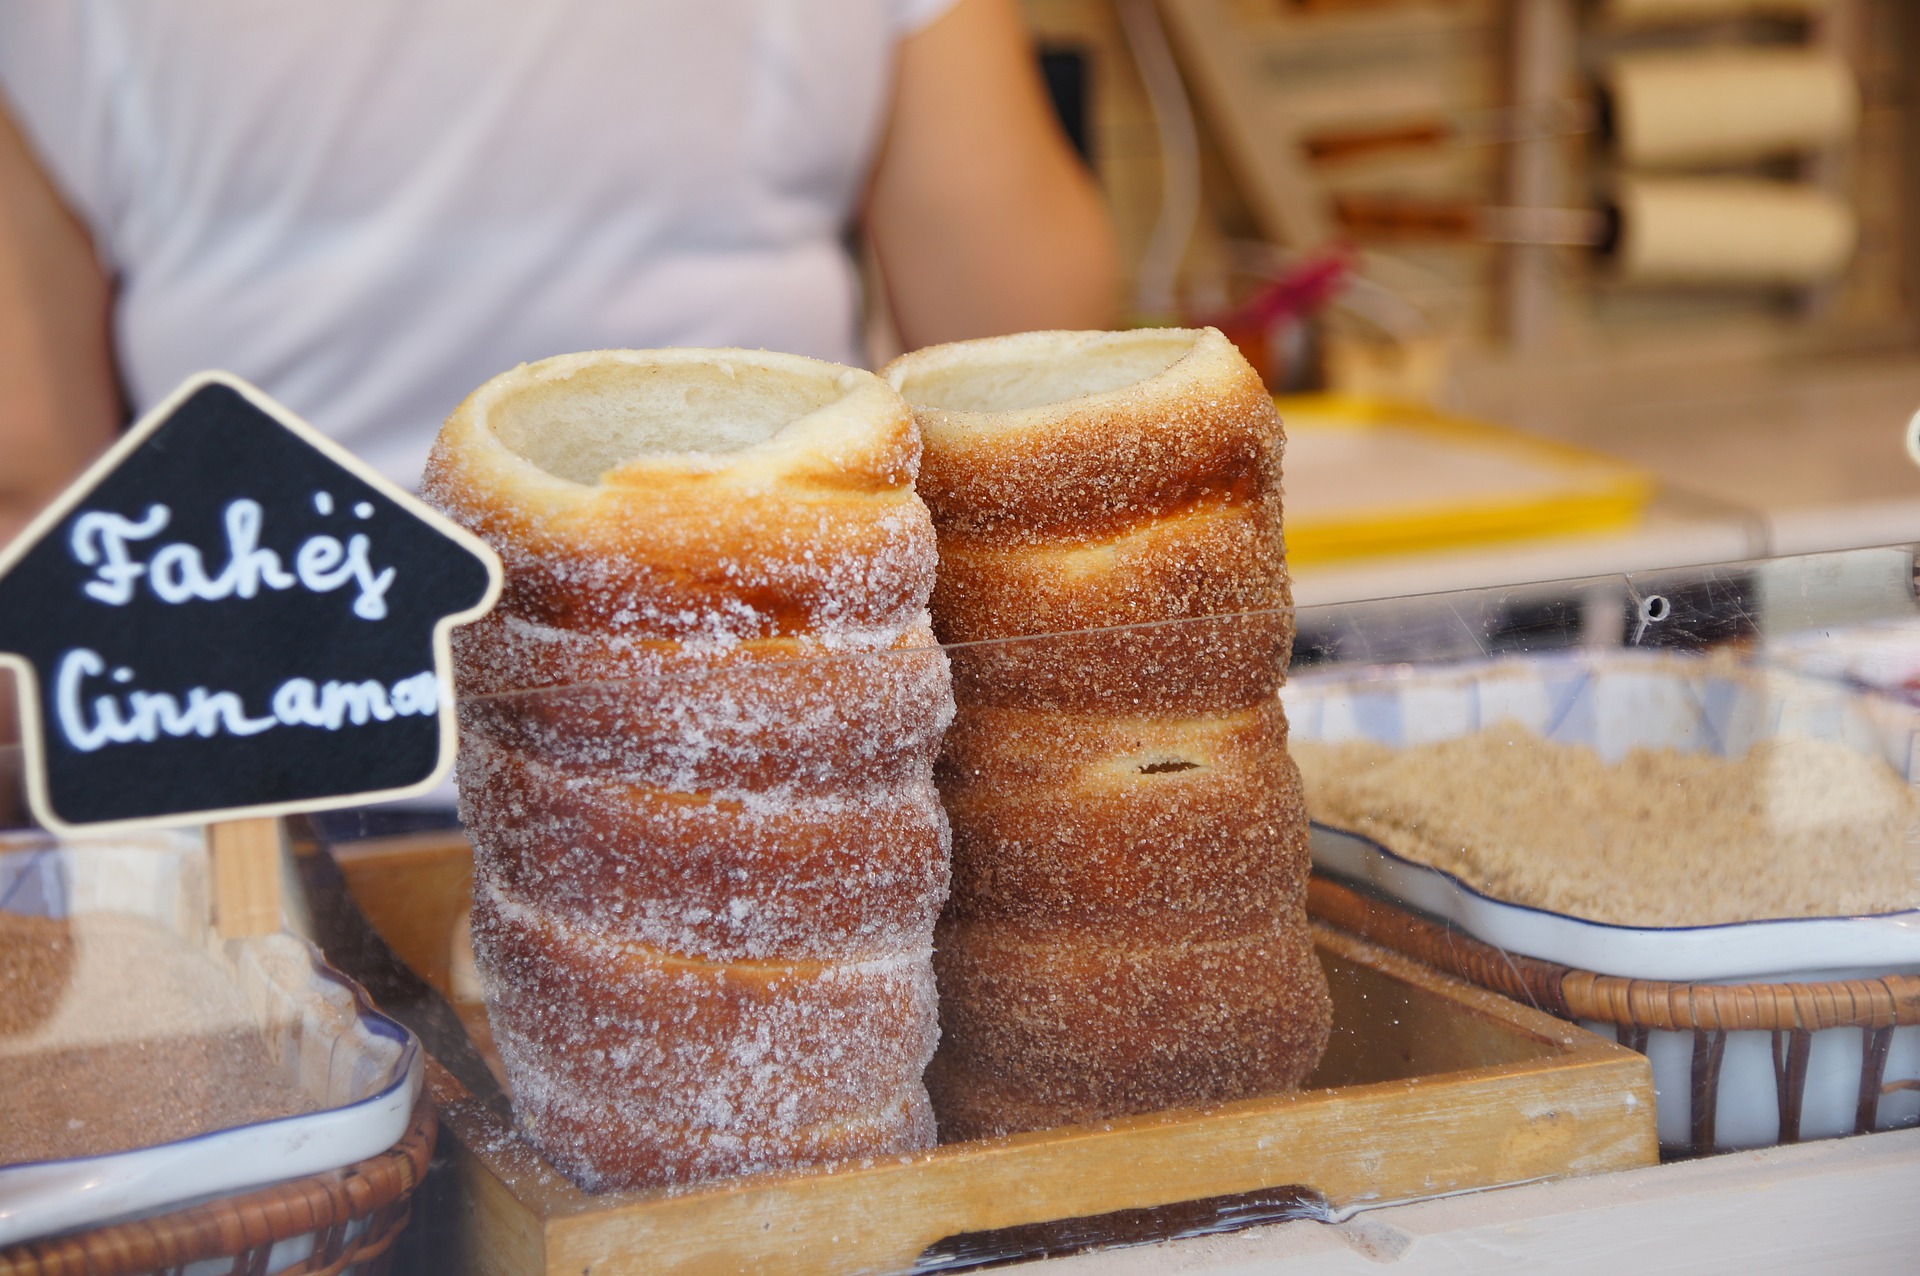 chimney cakes on display at bakery in Czech Republic